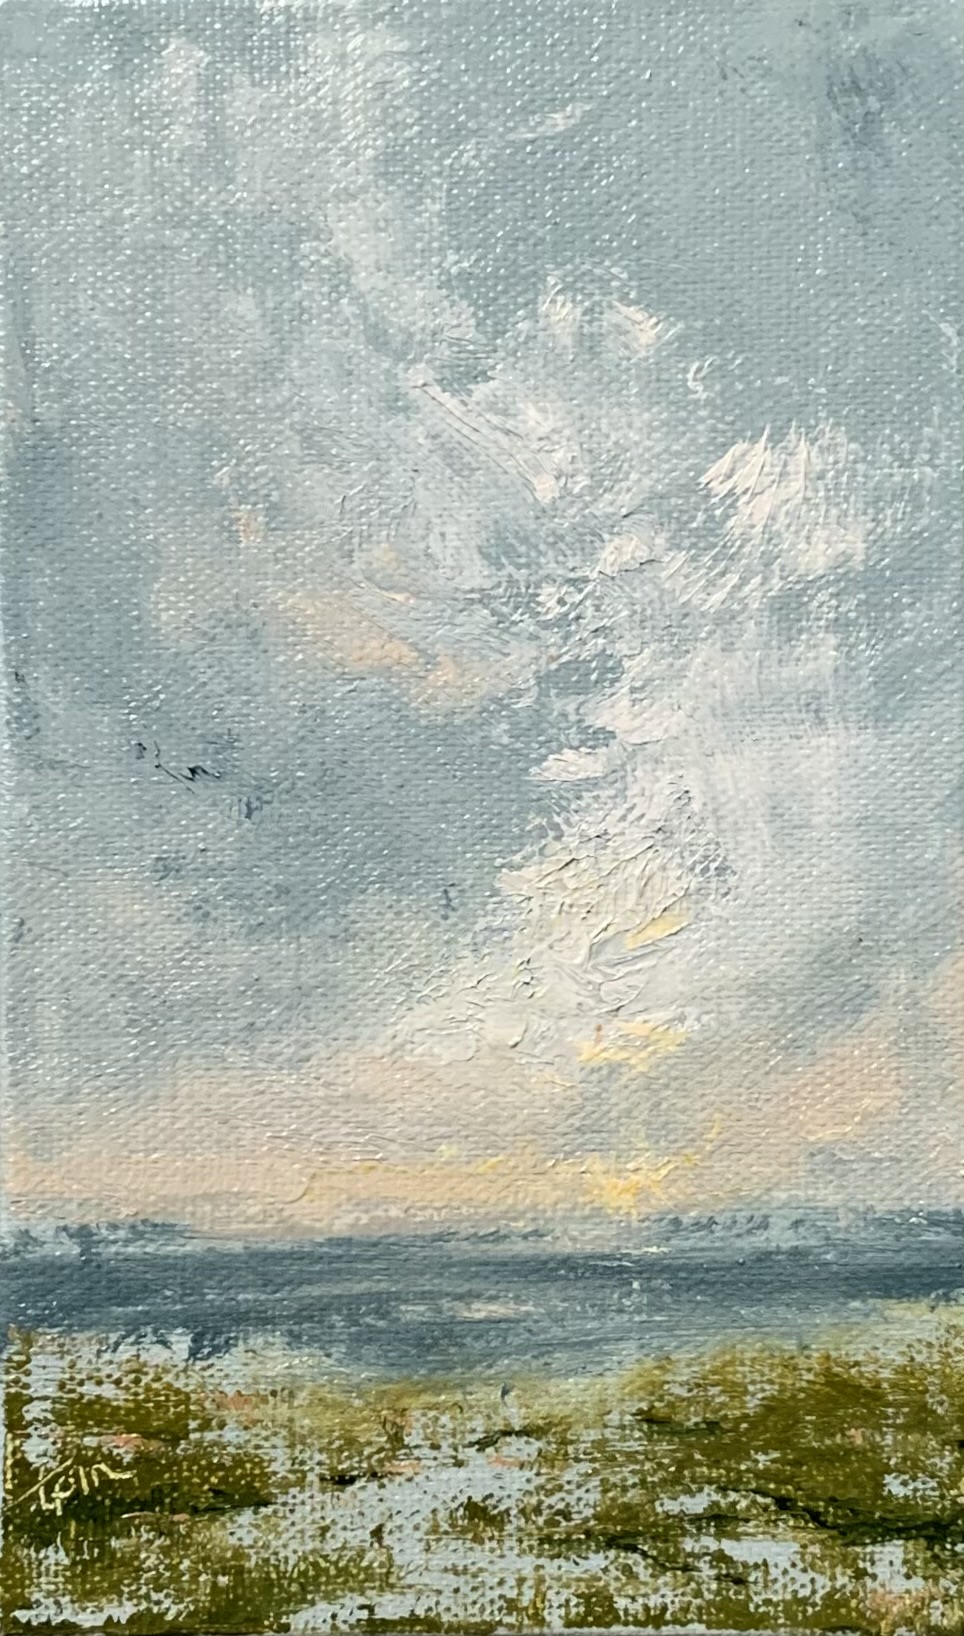 Original tiny oil painting by Tisha Mark, Week 29, 52 Weeks of Finding Light Series, 5"x3" oil on linen panel (2023). Painting of a cloudscape at sunrise over a coastal marsh.